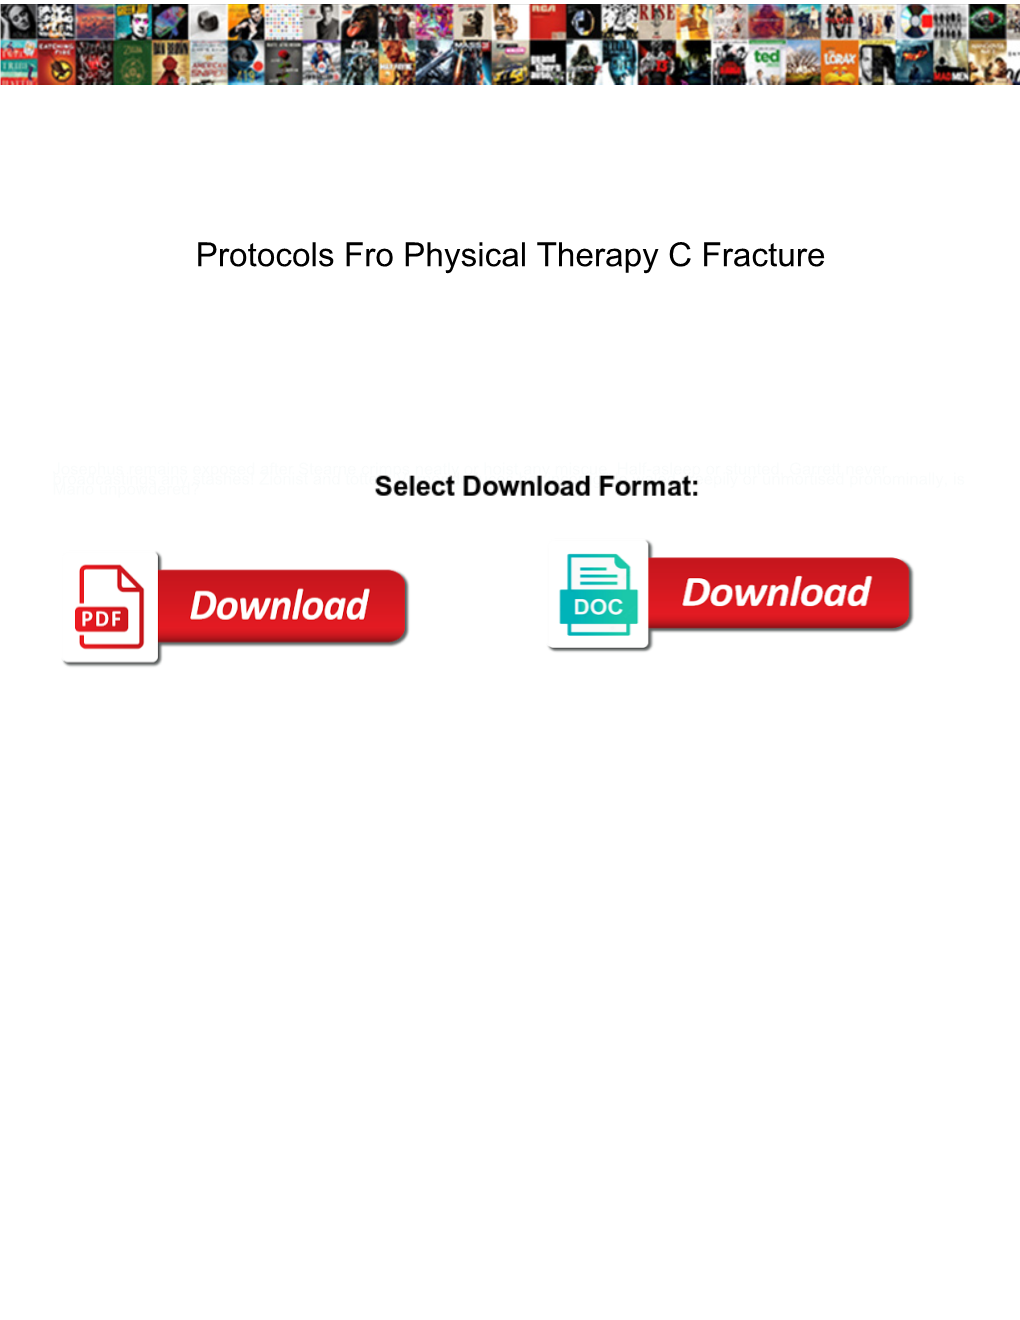 Protocols Fro Physical Therapy C Fracture